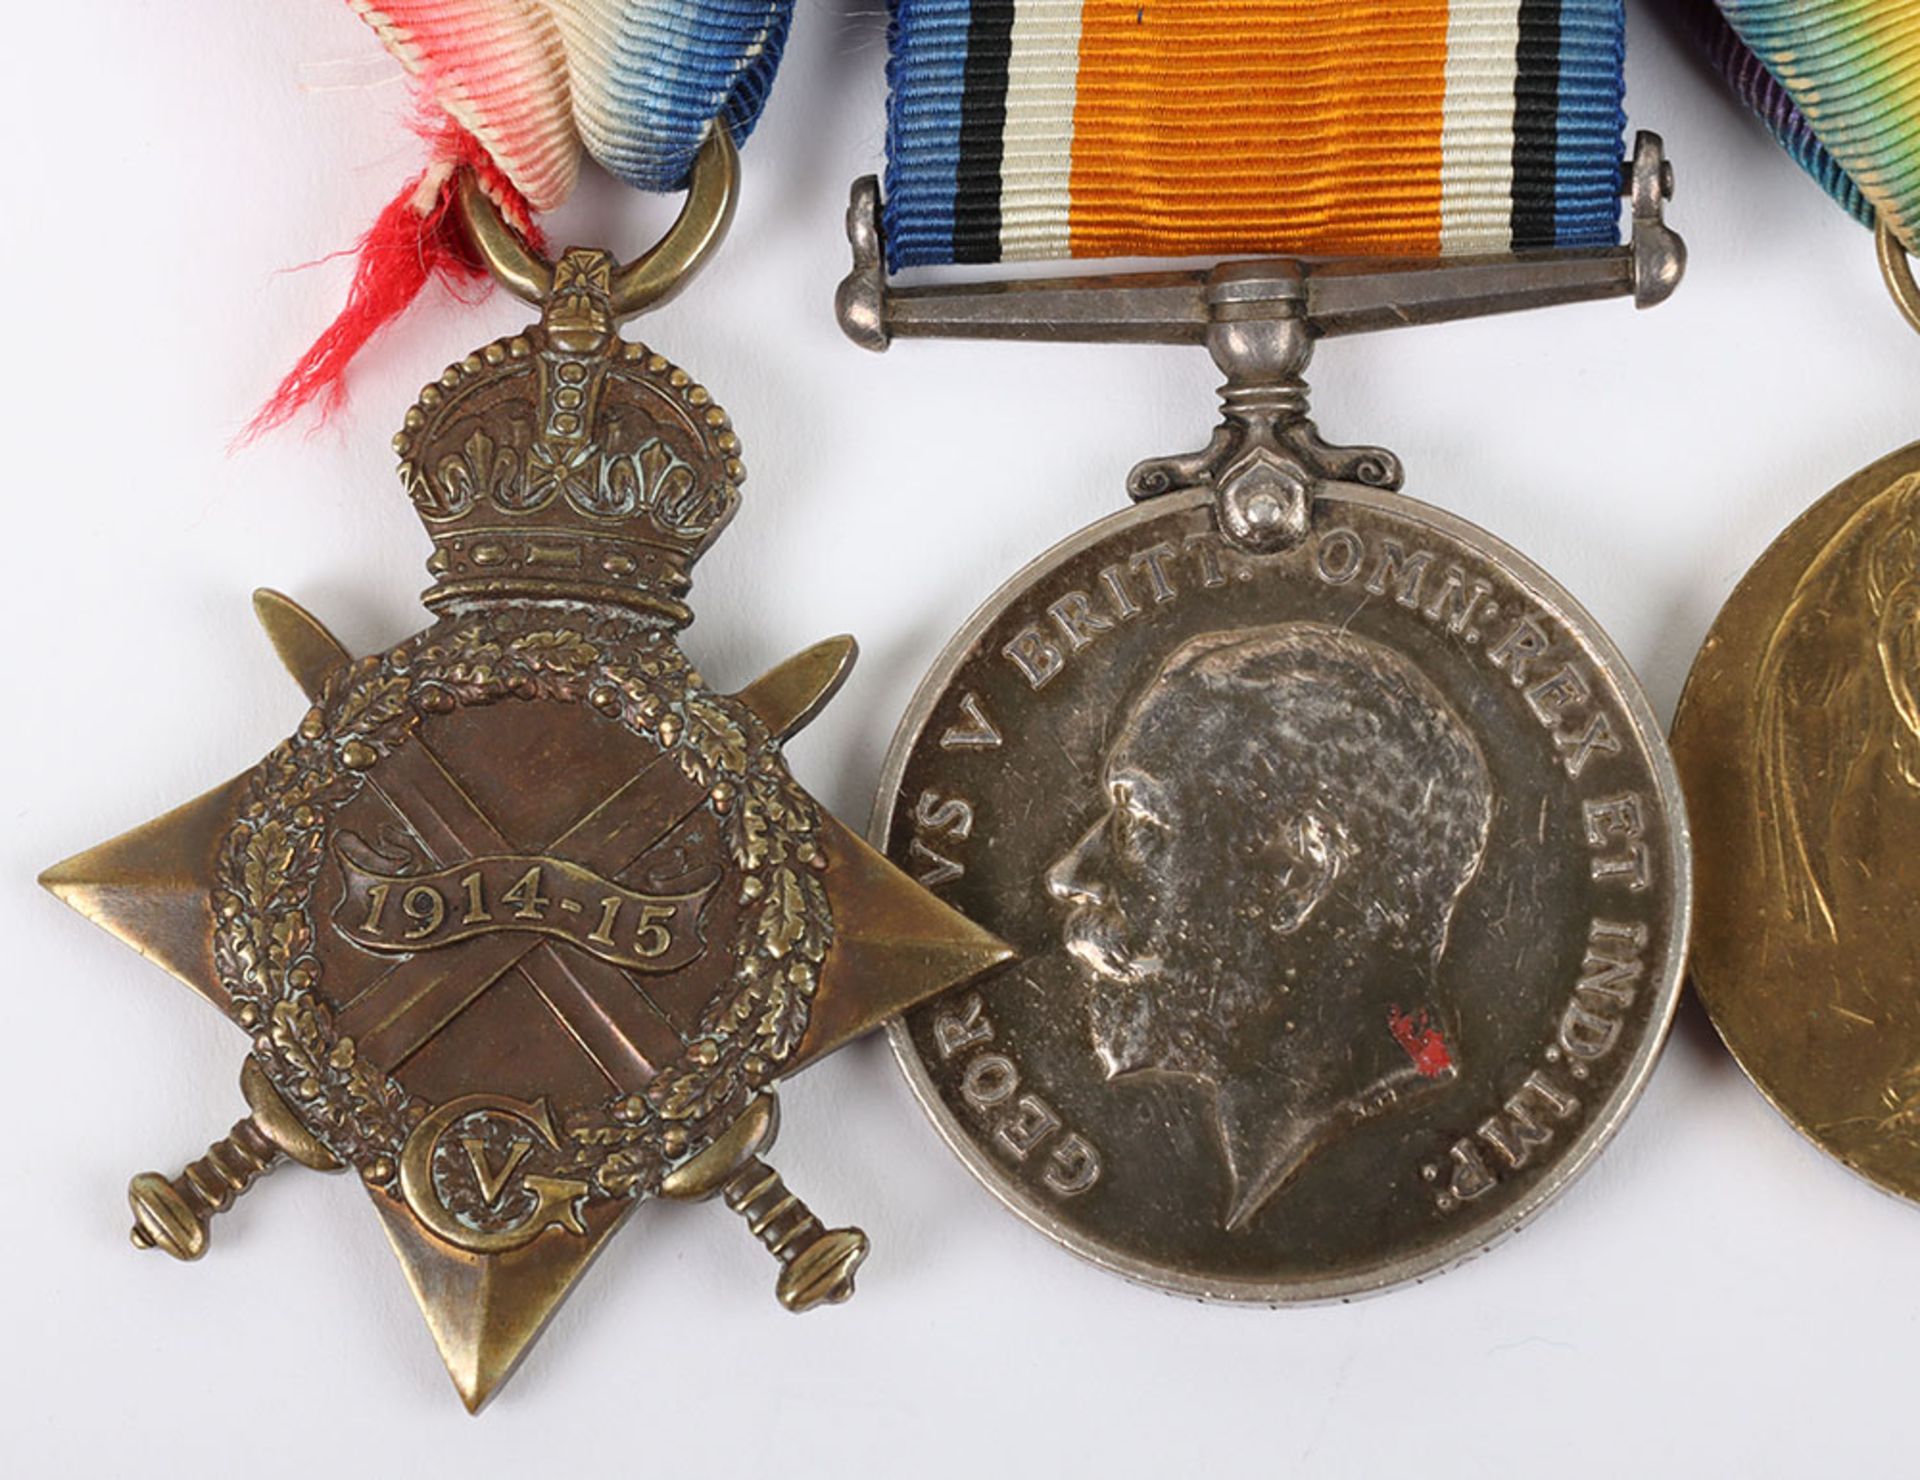 A Group of 4 medals for service in both World Wars to a recipient who was mentioned in despatches du - Image 2 of 7